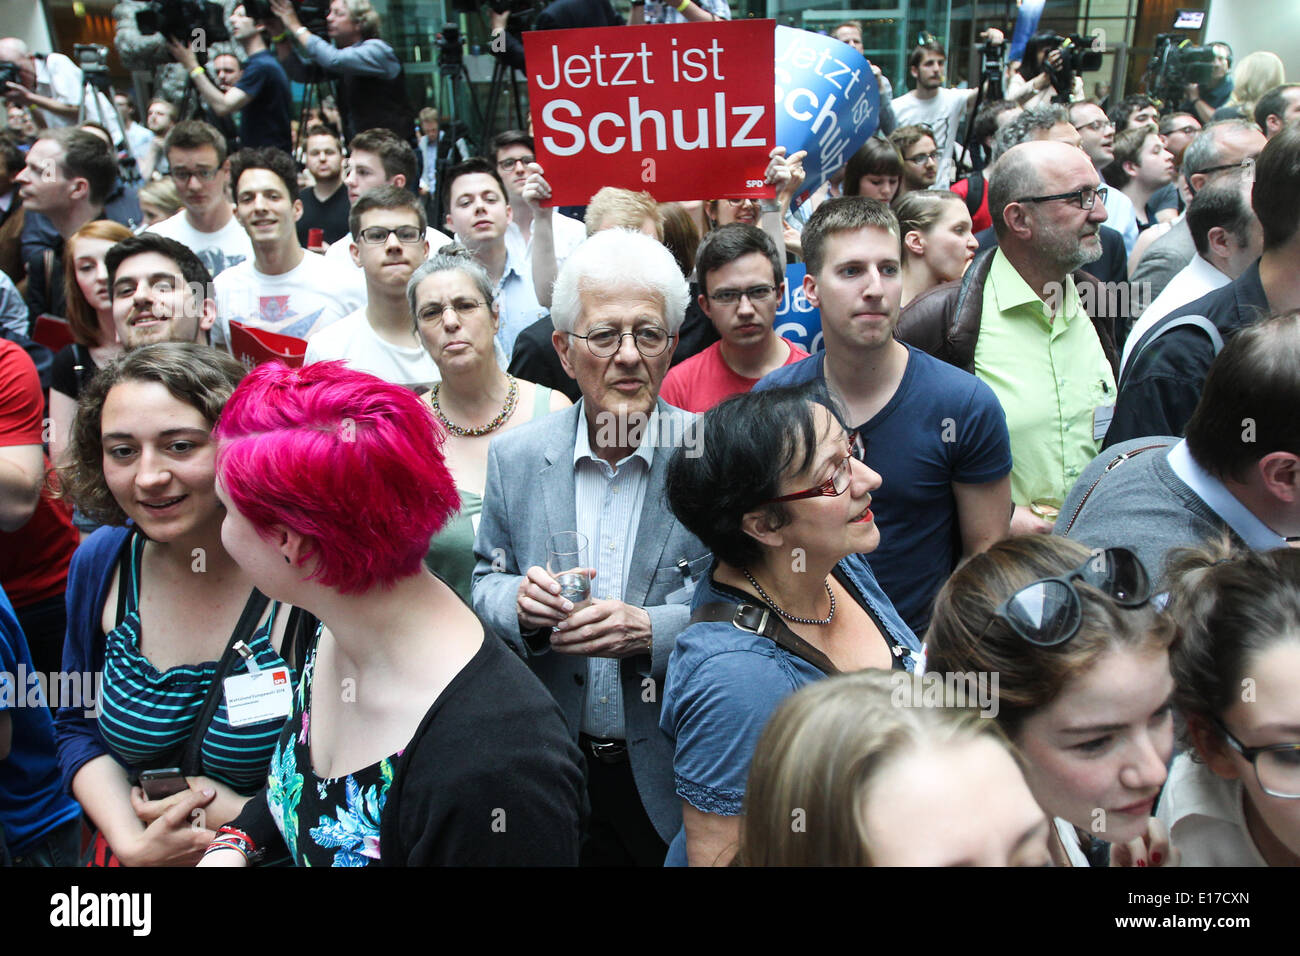 Berlin, Germany. 25th May, 2014. Supporters of Martin Schulz, incumbent president of the European Parliament (EP) and Party of European Socialists' (PES) candidate for the EP elections, hold posters reading 'Now is Schulz' at the German Social Democrat's (SPD) headquarters in Berlin, Germany, on May 25, 2014. Martin Schulz, top candidate of European socialists, showed confidence in his bid for the post of European Commission (EC) president after Germany's election to the EP ended on Sunday. Credit:  Xinhua/Alamy Live News Stock Photo